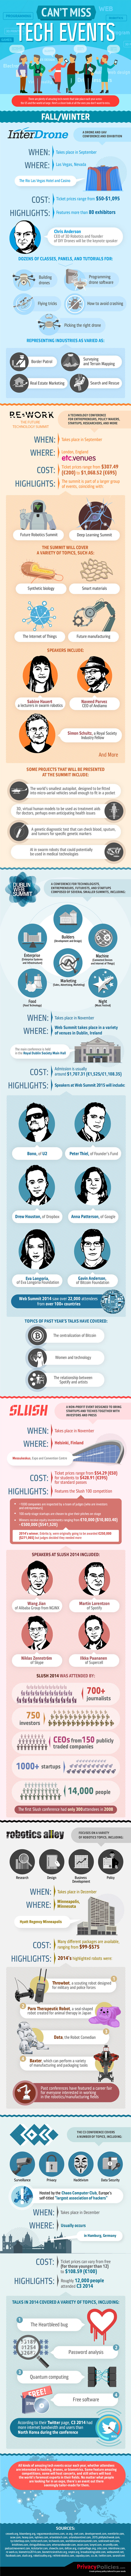 Can’t Miss Tech Events - An Infographic from PrivacyPolicies.com Blog